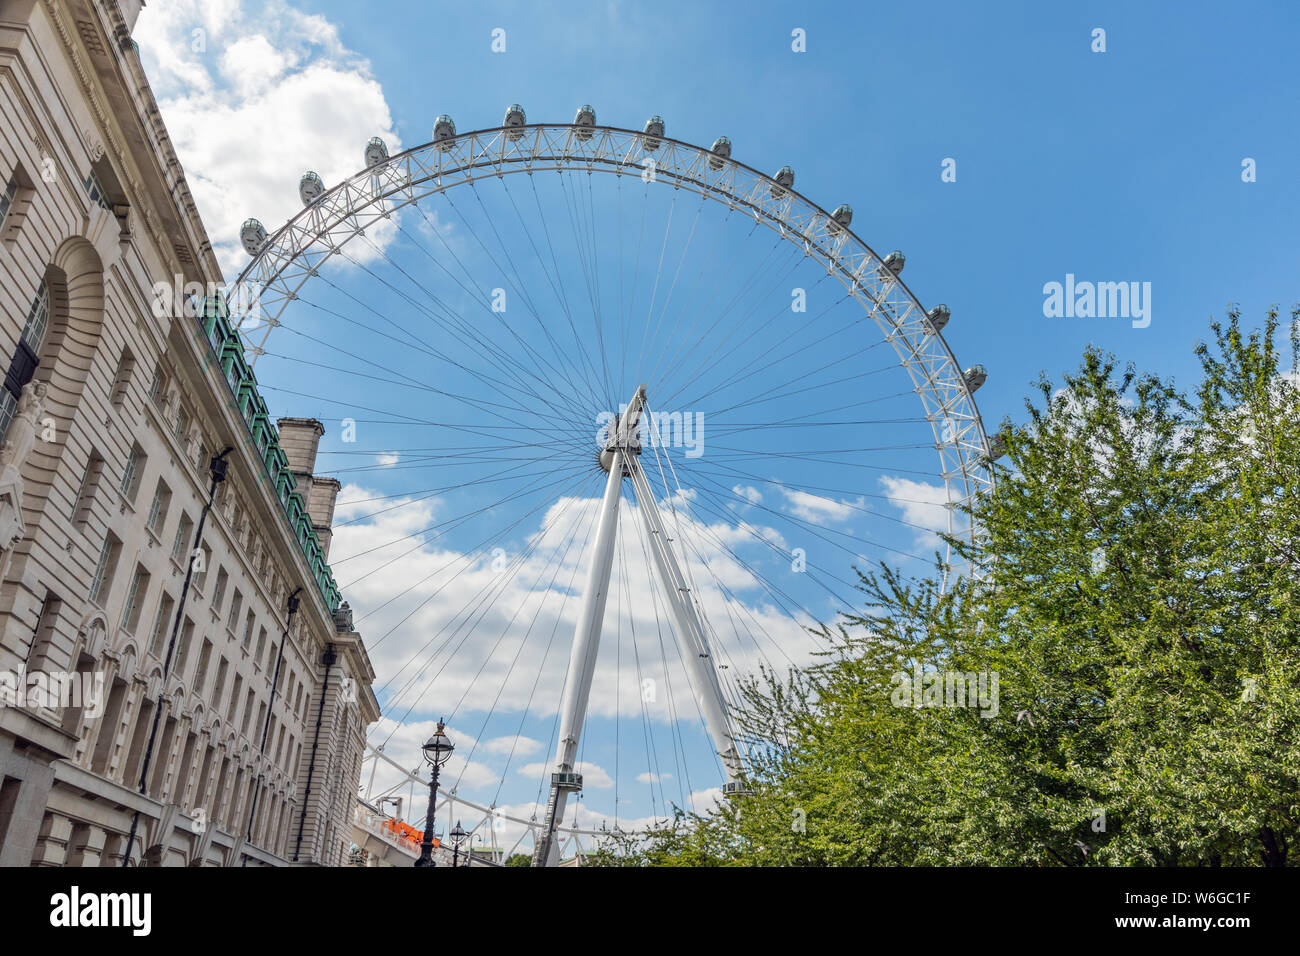 London / UK, July 15th 2019 - The London Eye against a bright blue summer sky Stock Photo